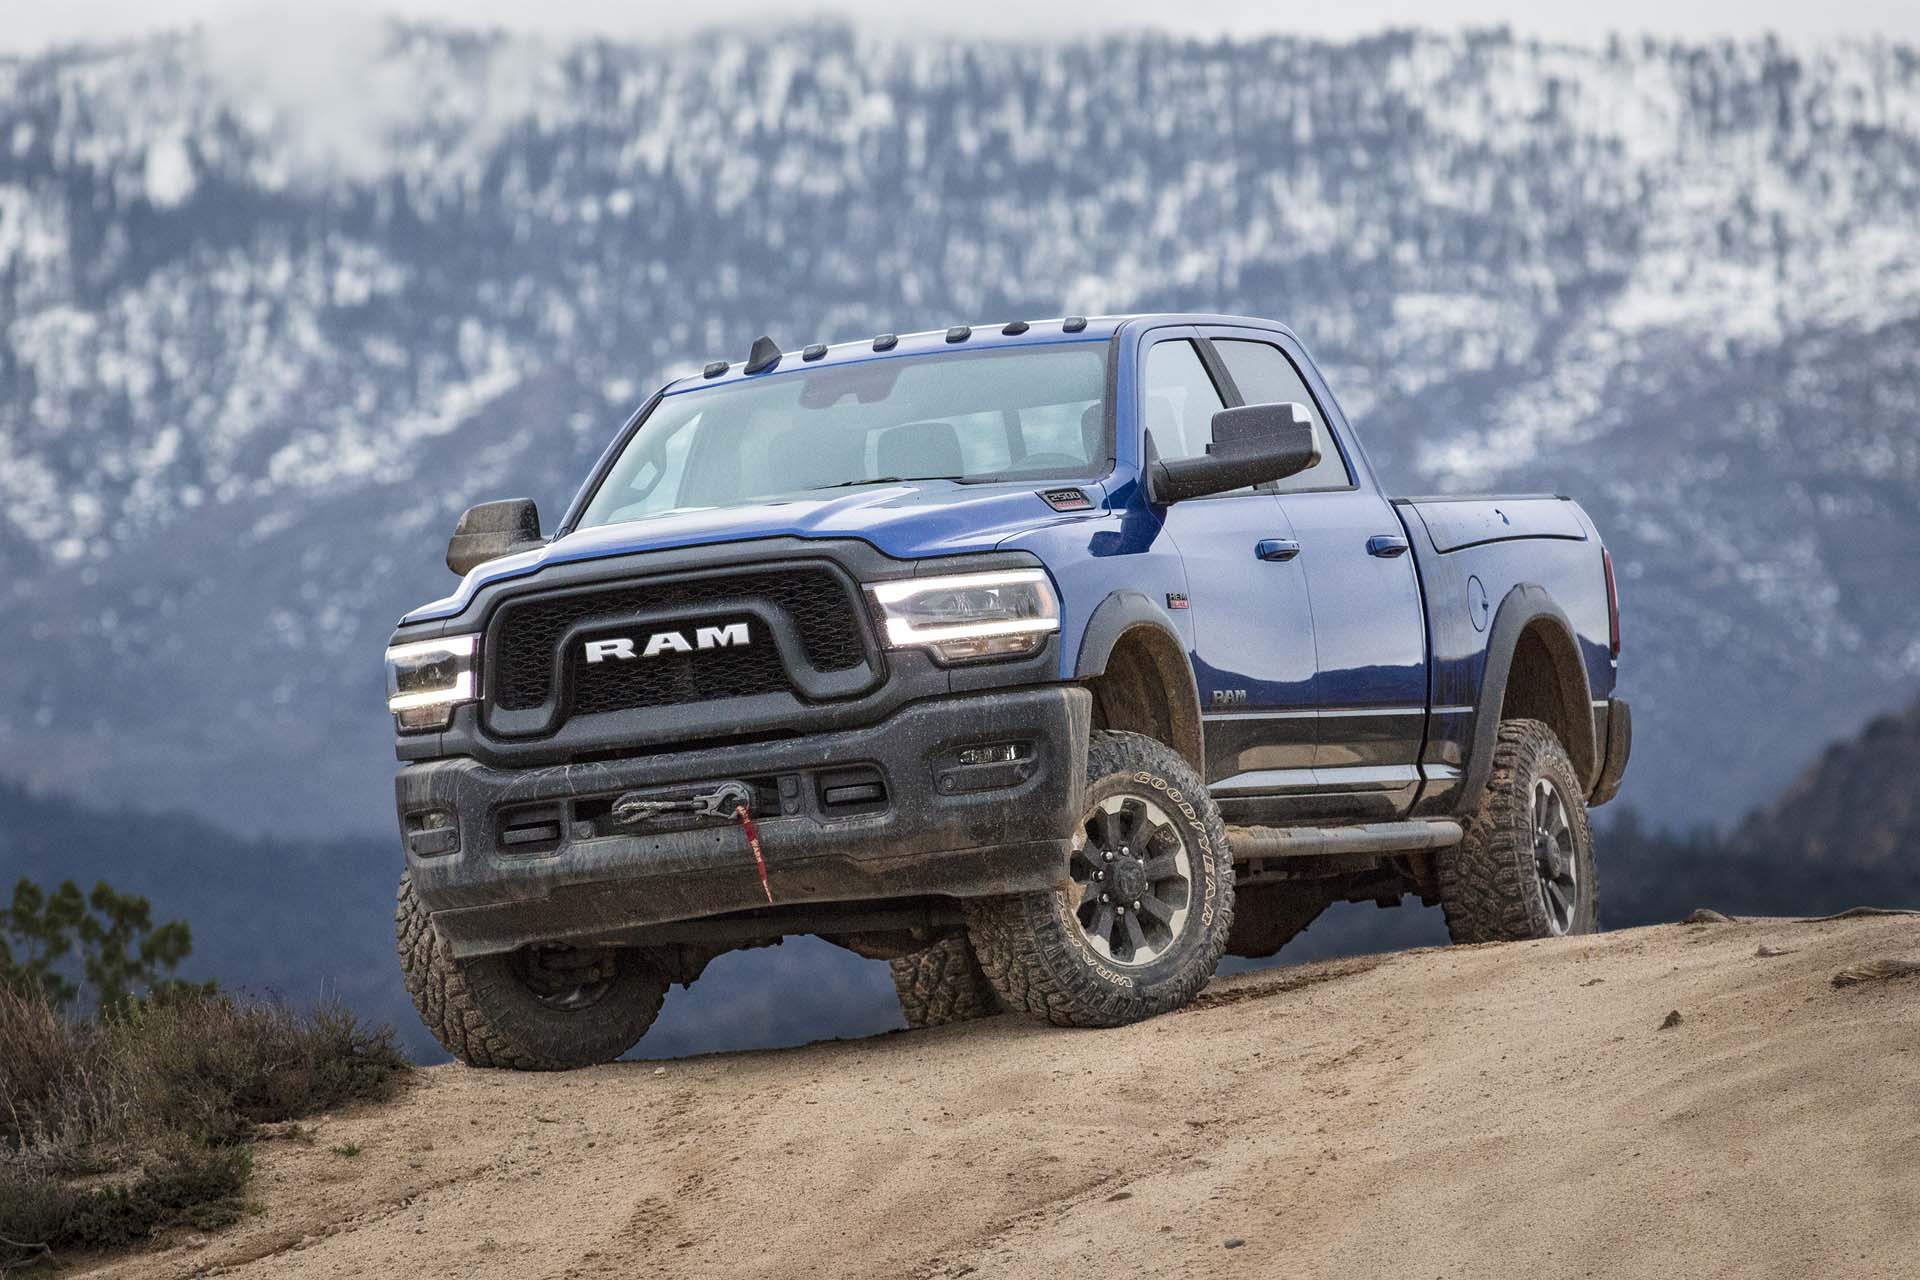 First drive review 2019 Ram 2500 Power Wagon conquers nearly anything